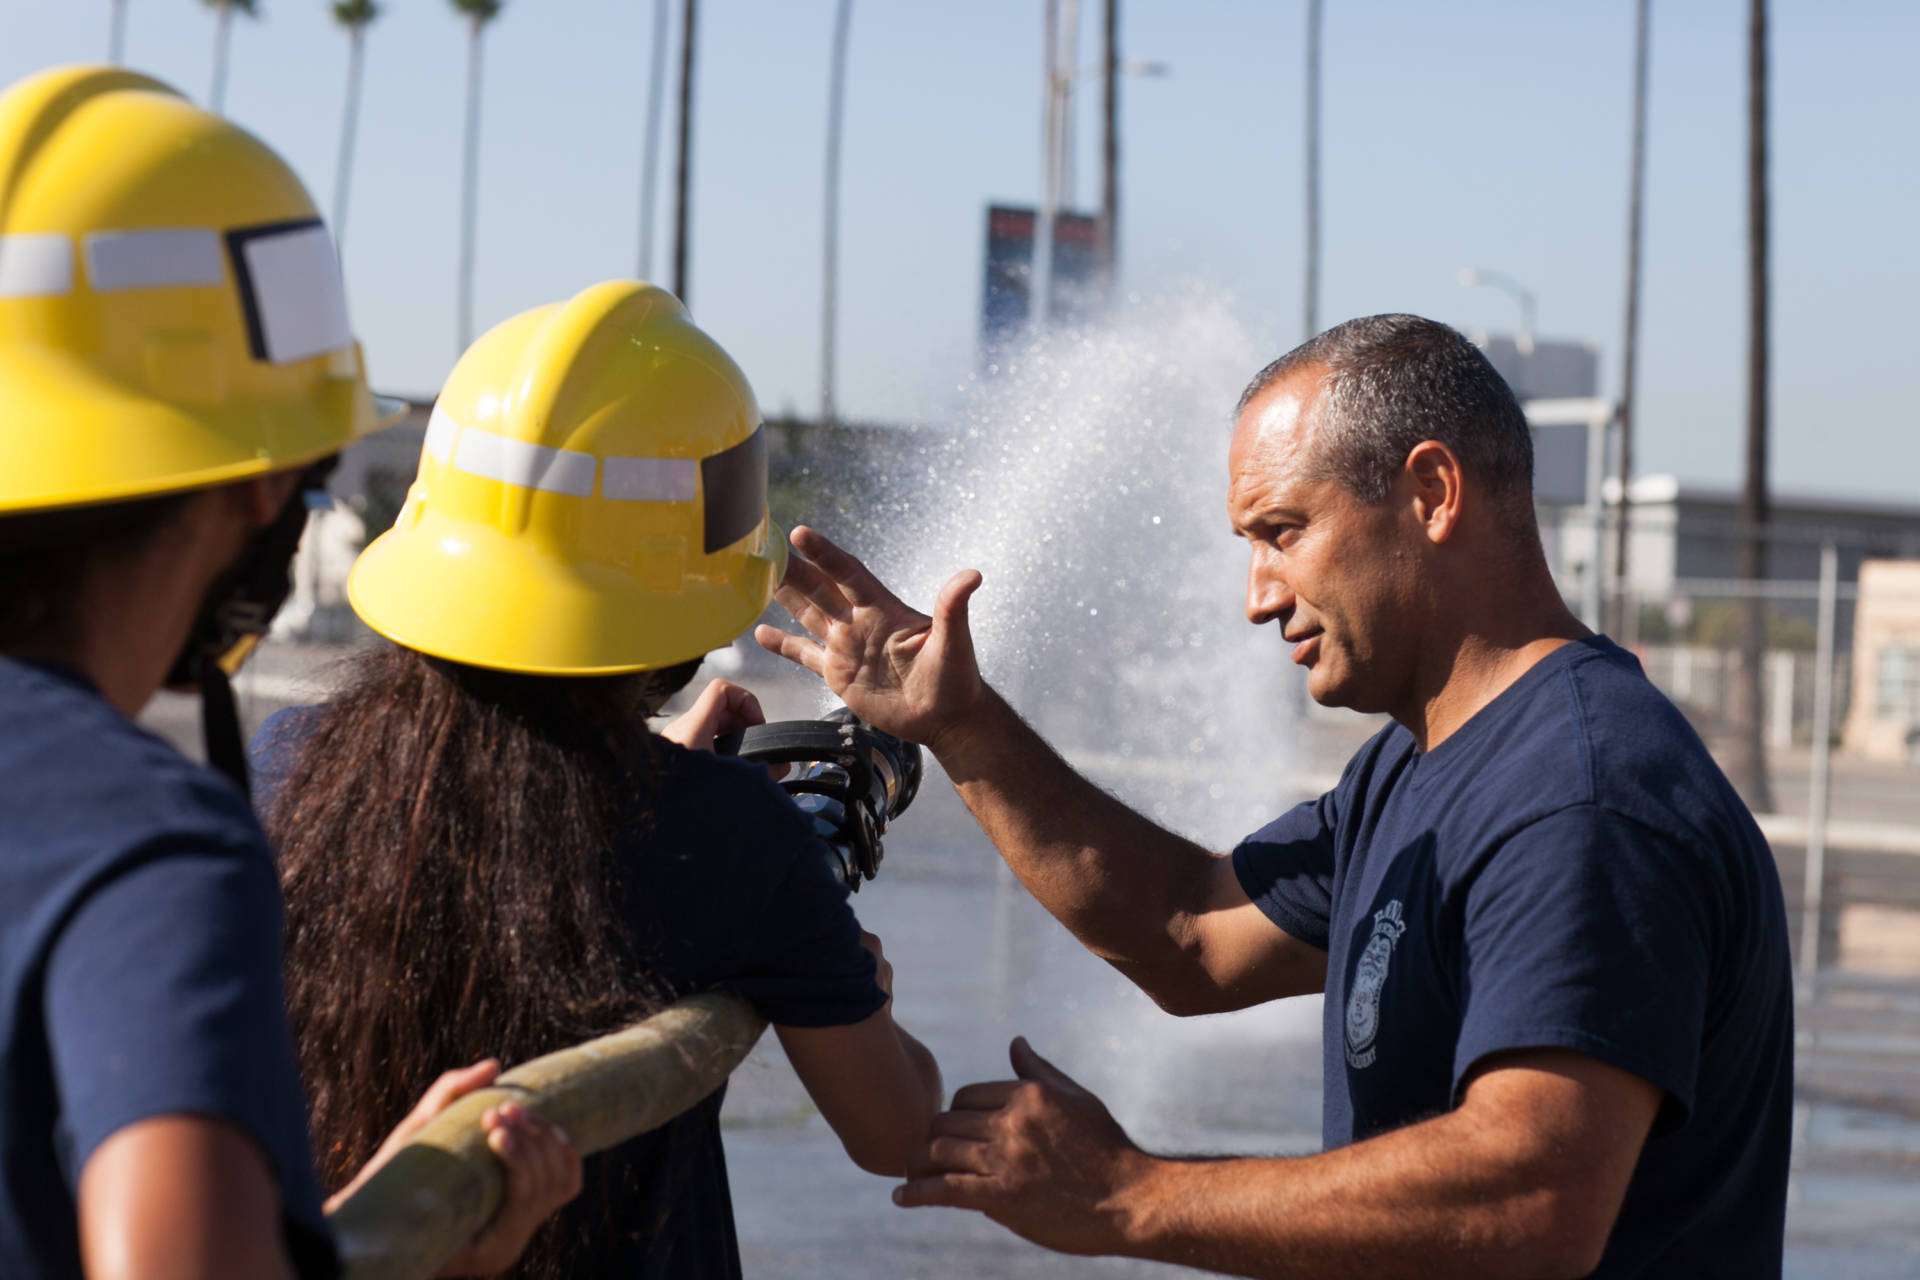 LAFD Capt. Eddie Marez instructs cadets at Banning High on how to operate a fire hose. Roxanne Turpen/NPR